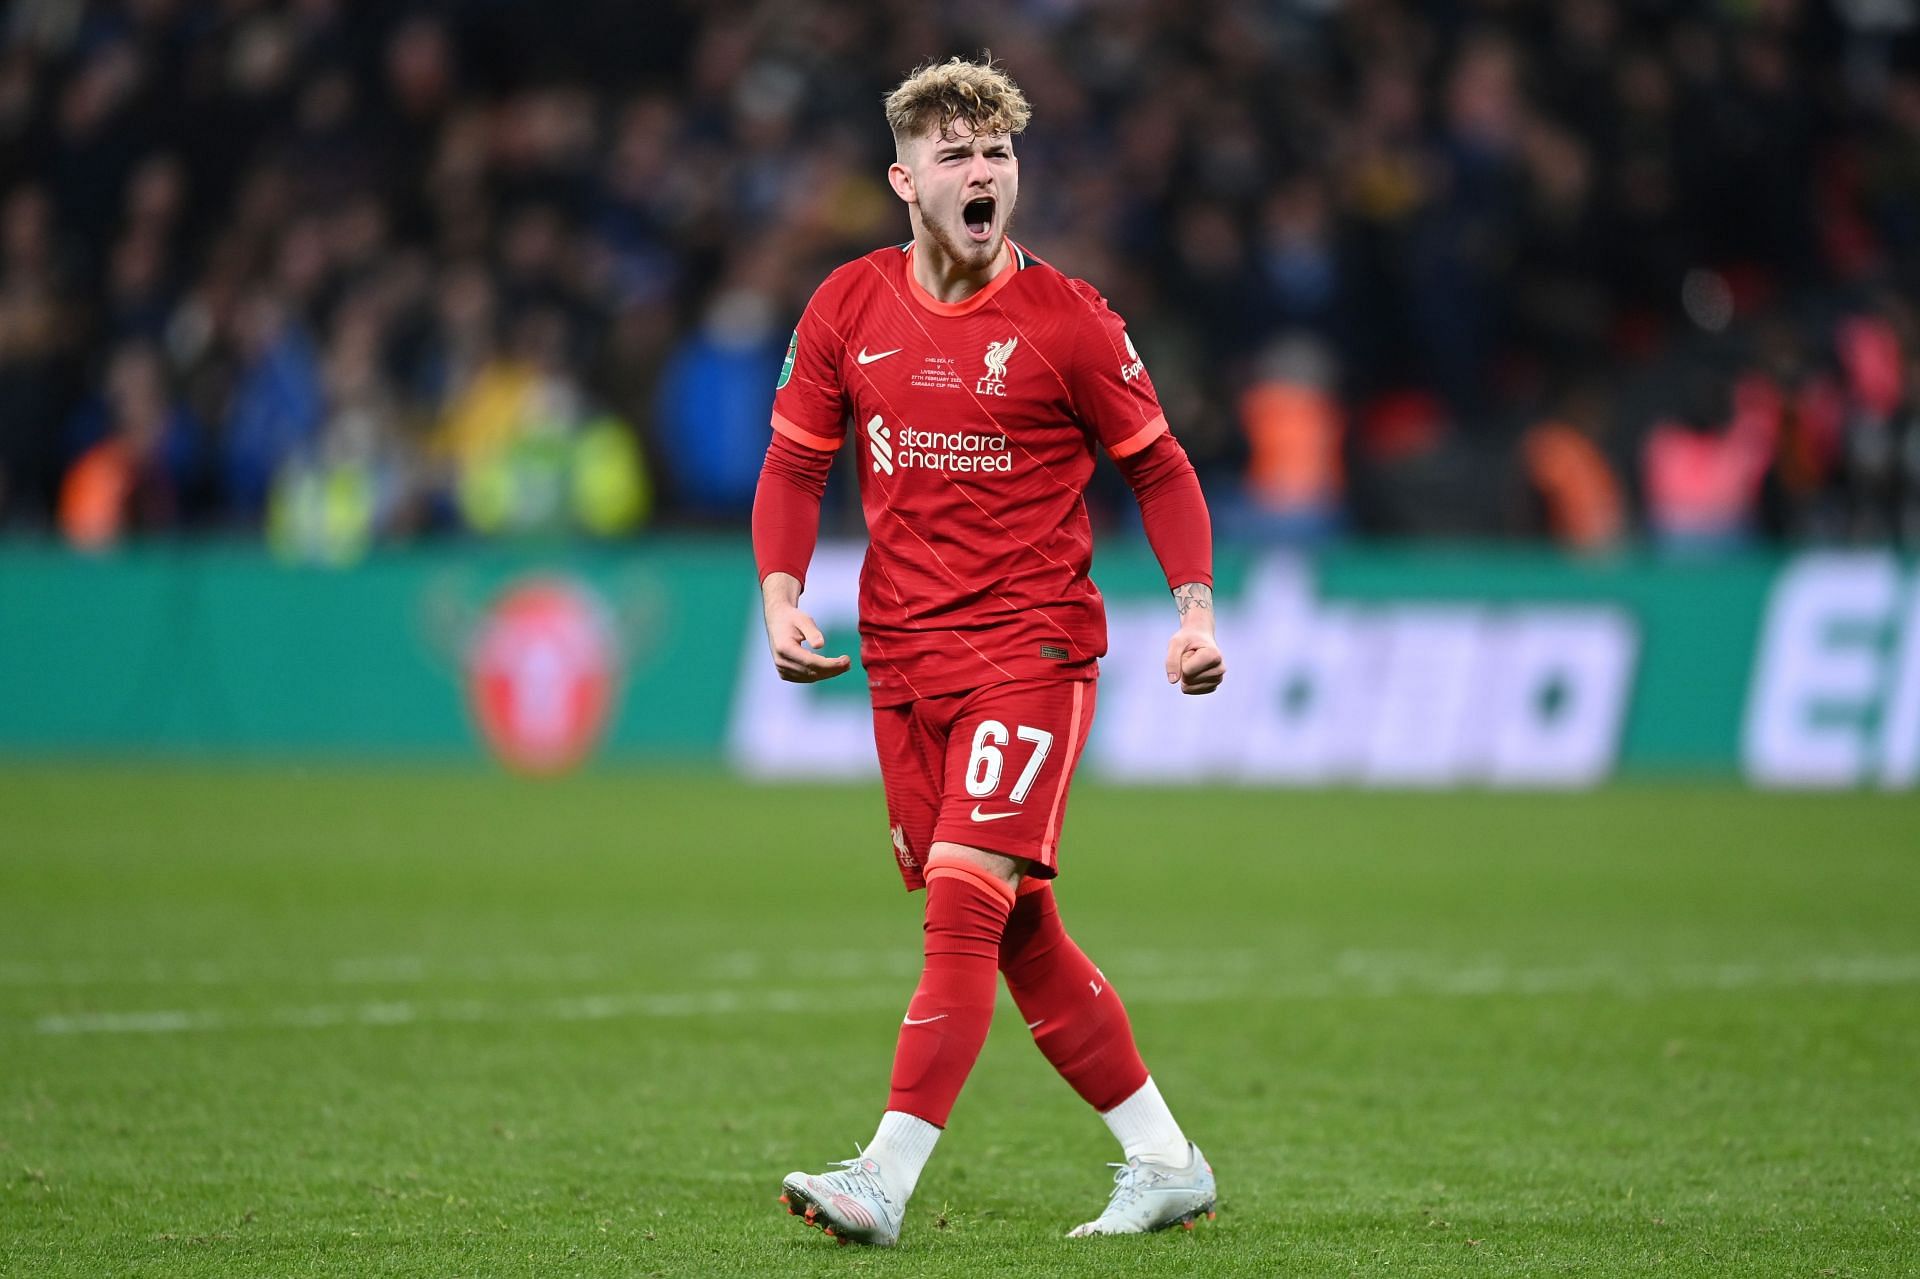 Harvey Elliott is the youngest ever-player to earn a cap for Liverpool